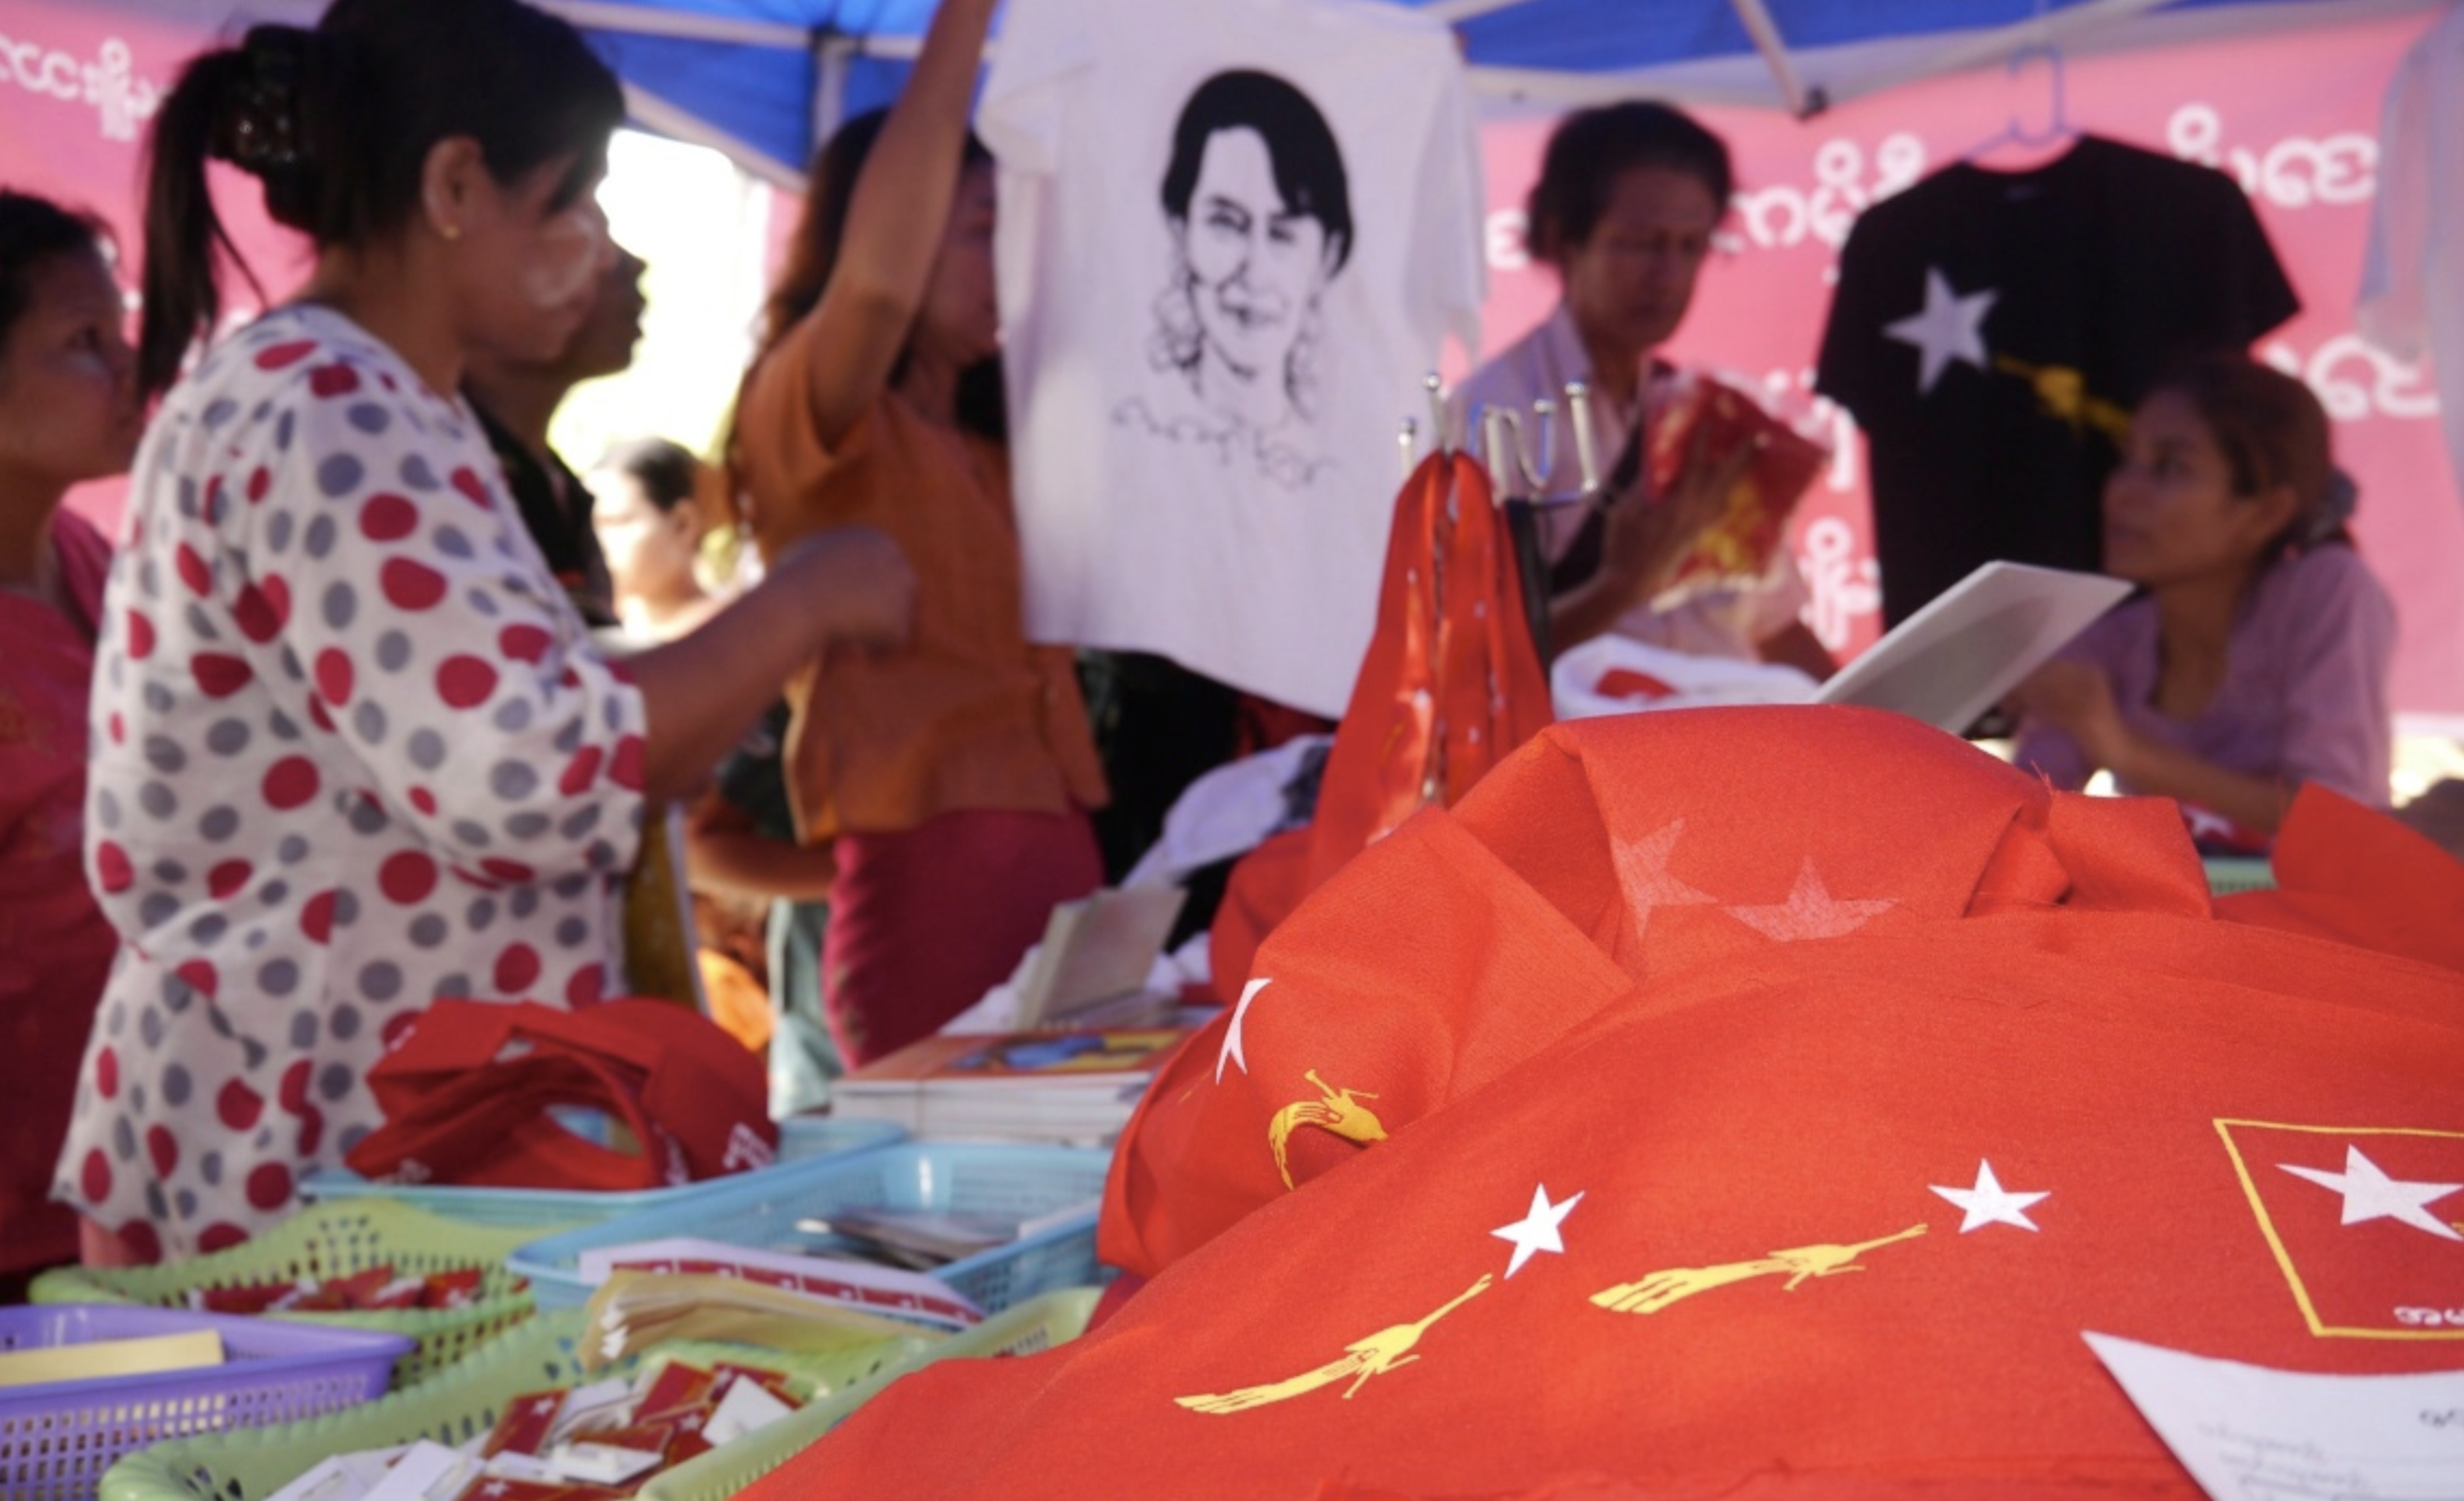  Suu Kyi’s return to political prominence has sparked a booming t-shirt trade. This shop in particular, located adjacent to the NLD party headquarters, is constantly thronged by locals and tourists alike, all looking to take a bit of Aung San Suu Kyi